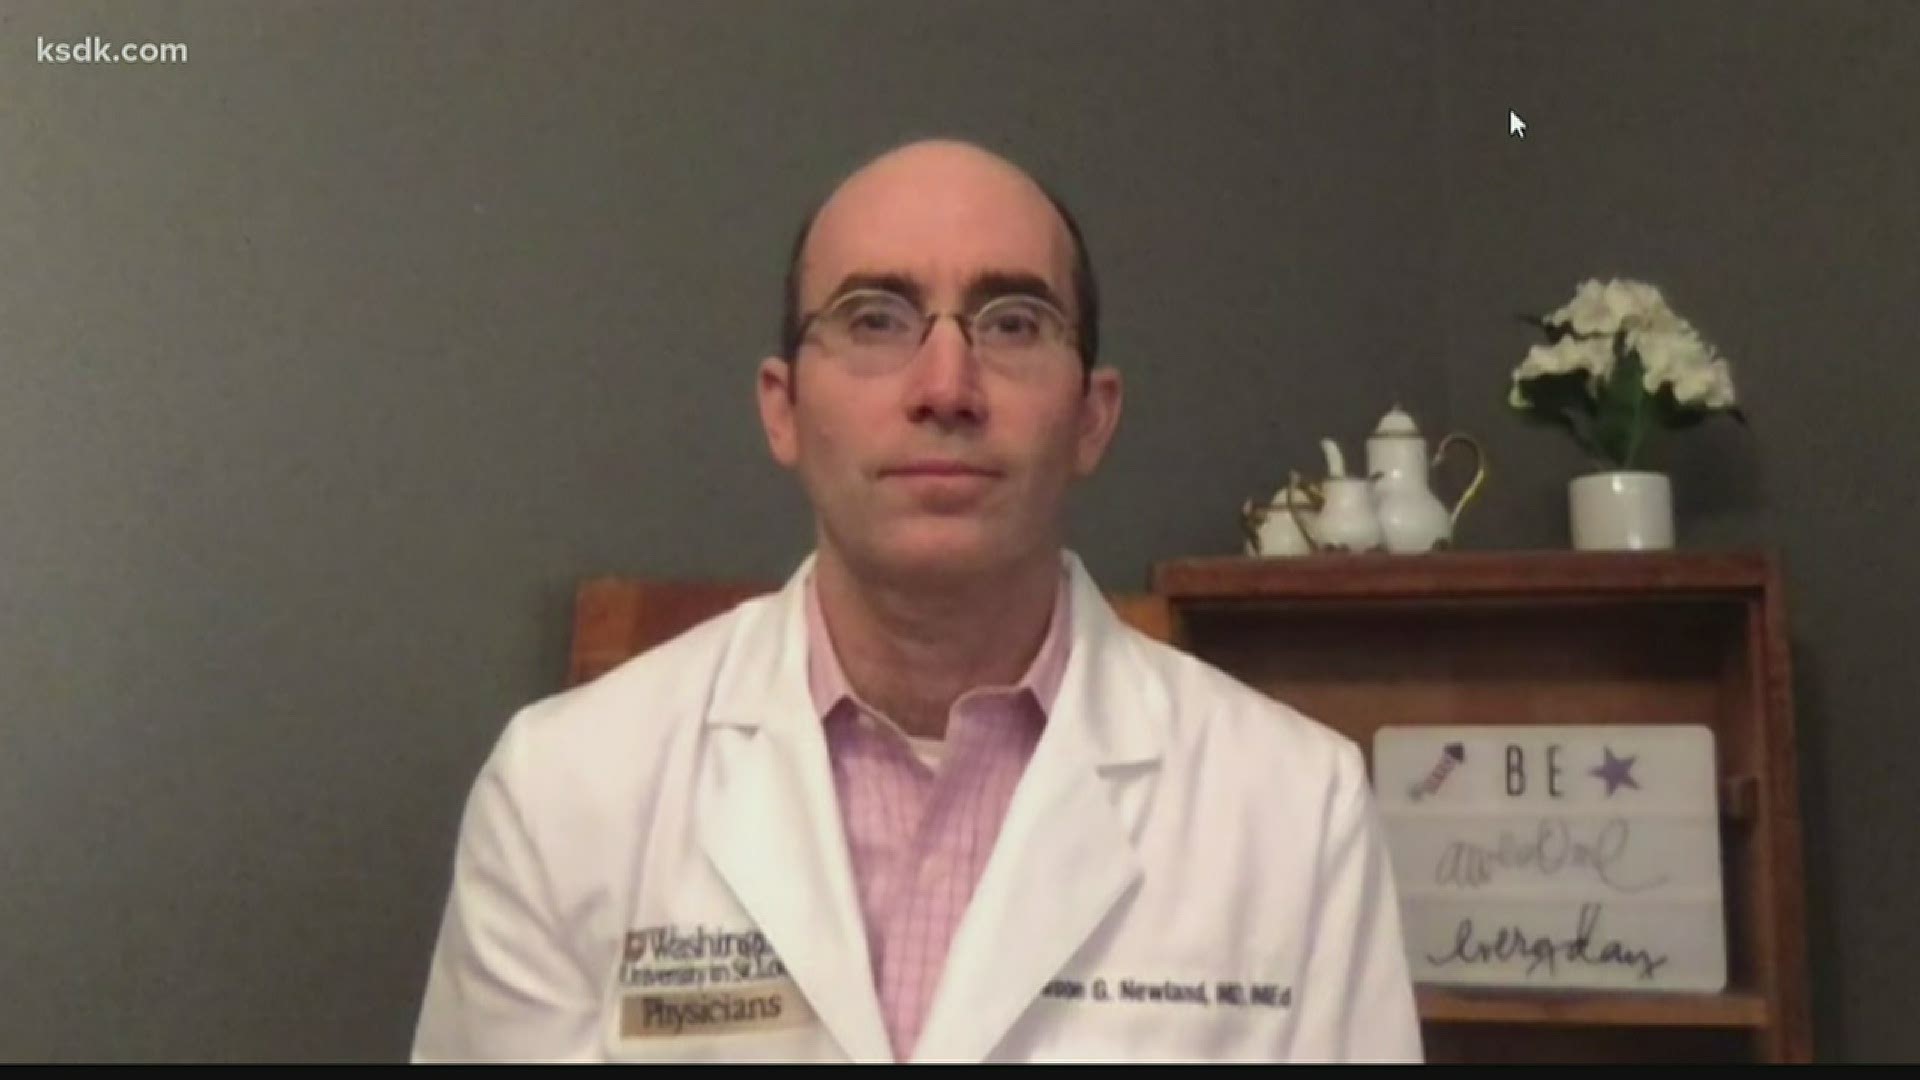 Dr. Jason Newland is an infections diseases expert at Washington University.